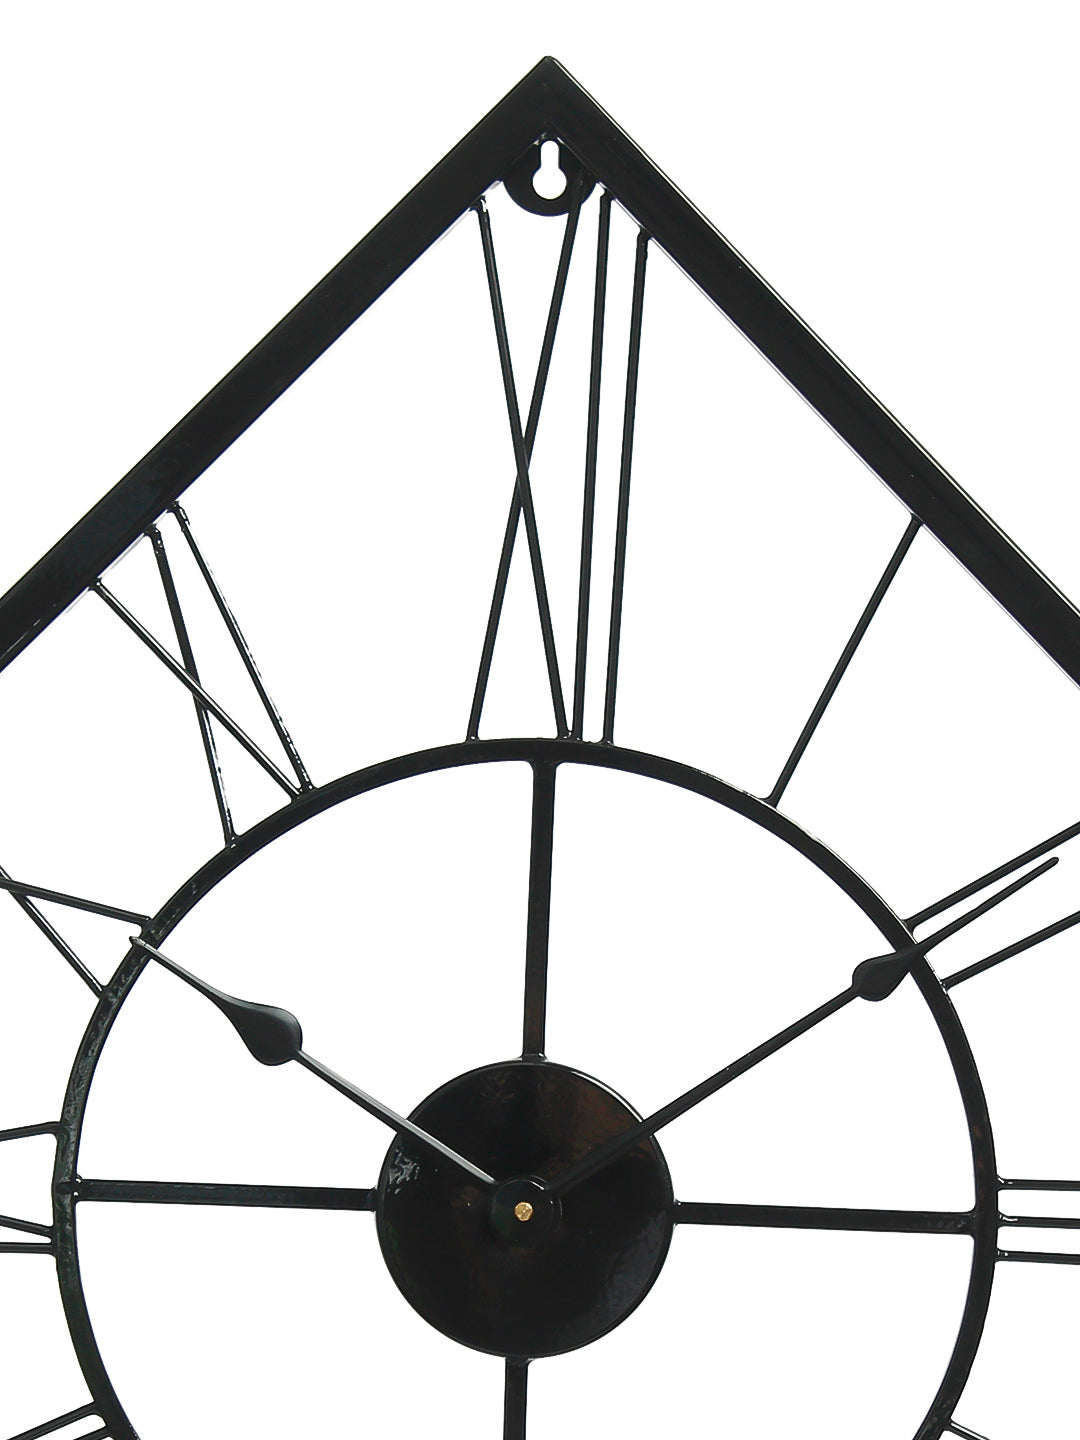 Black Iron Kite Shape Handcrafted Analog Roman Number Wall Clock Without Glass 4